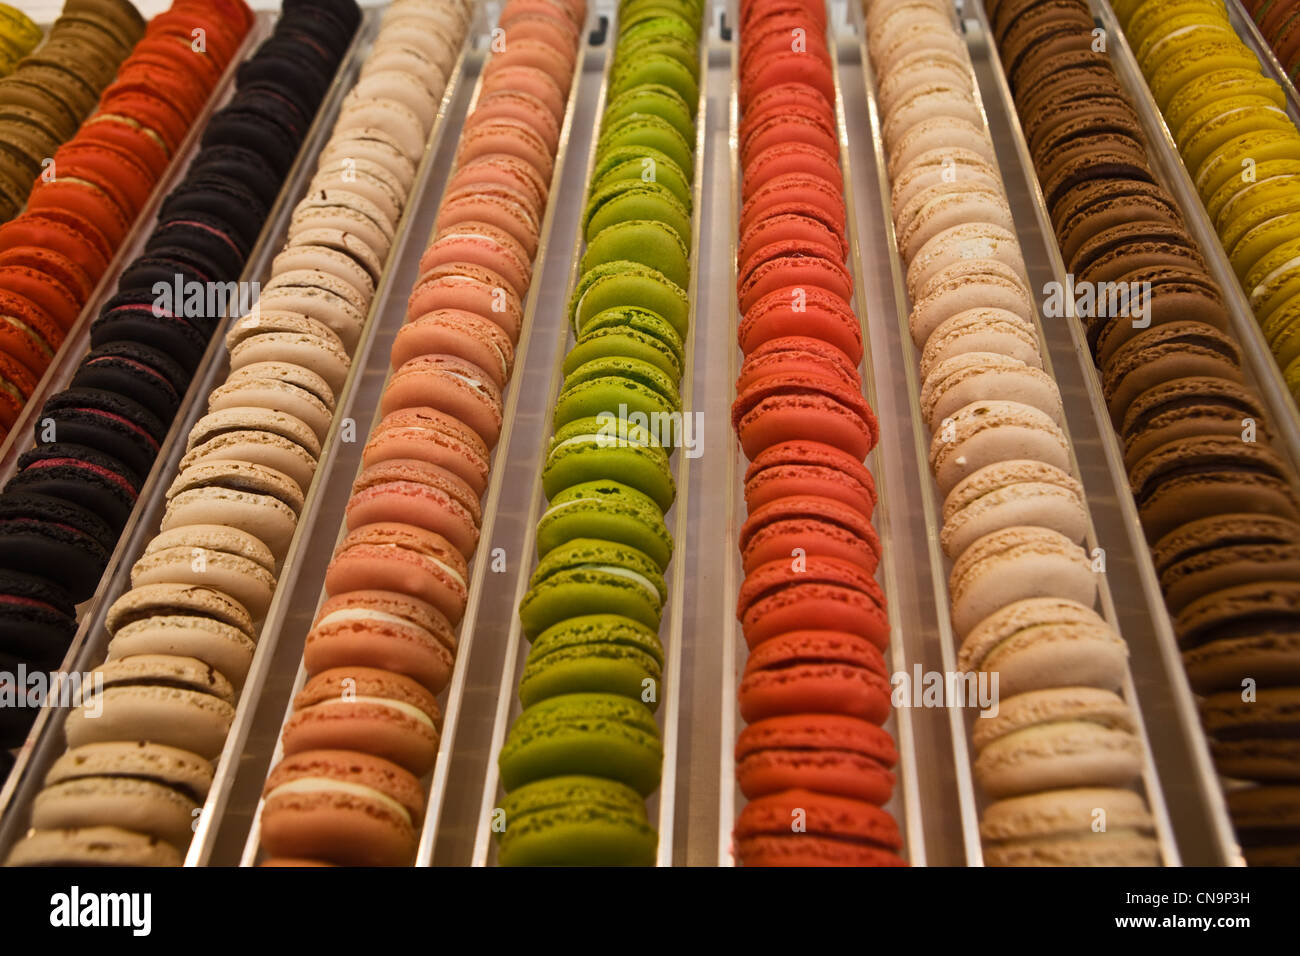 France, Finistere, Brest, the thirteen kinds of macaroons from Pierre Yves Henaff C in Chocolate Stock Photo